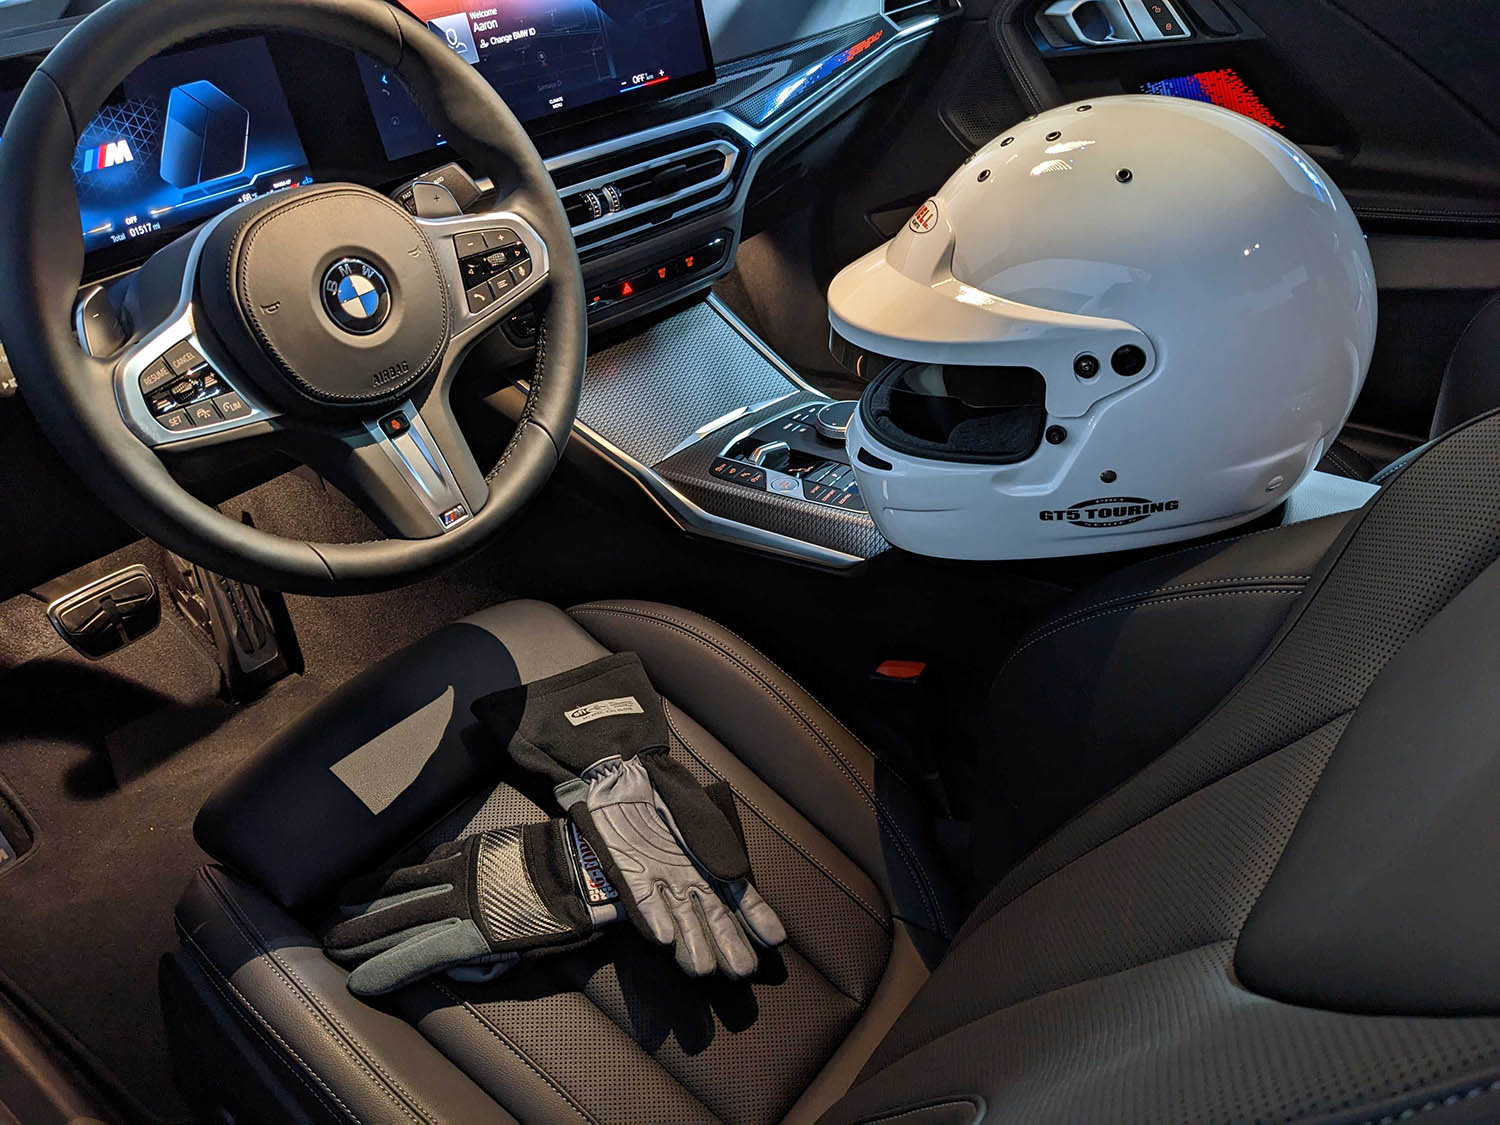 Helmet and driving gloves in cockpit of BMW